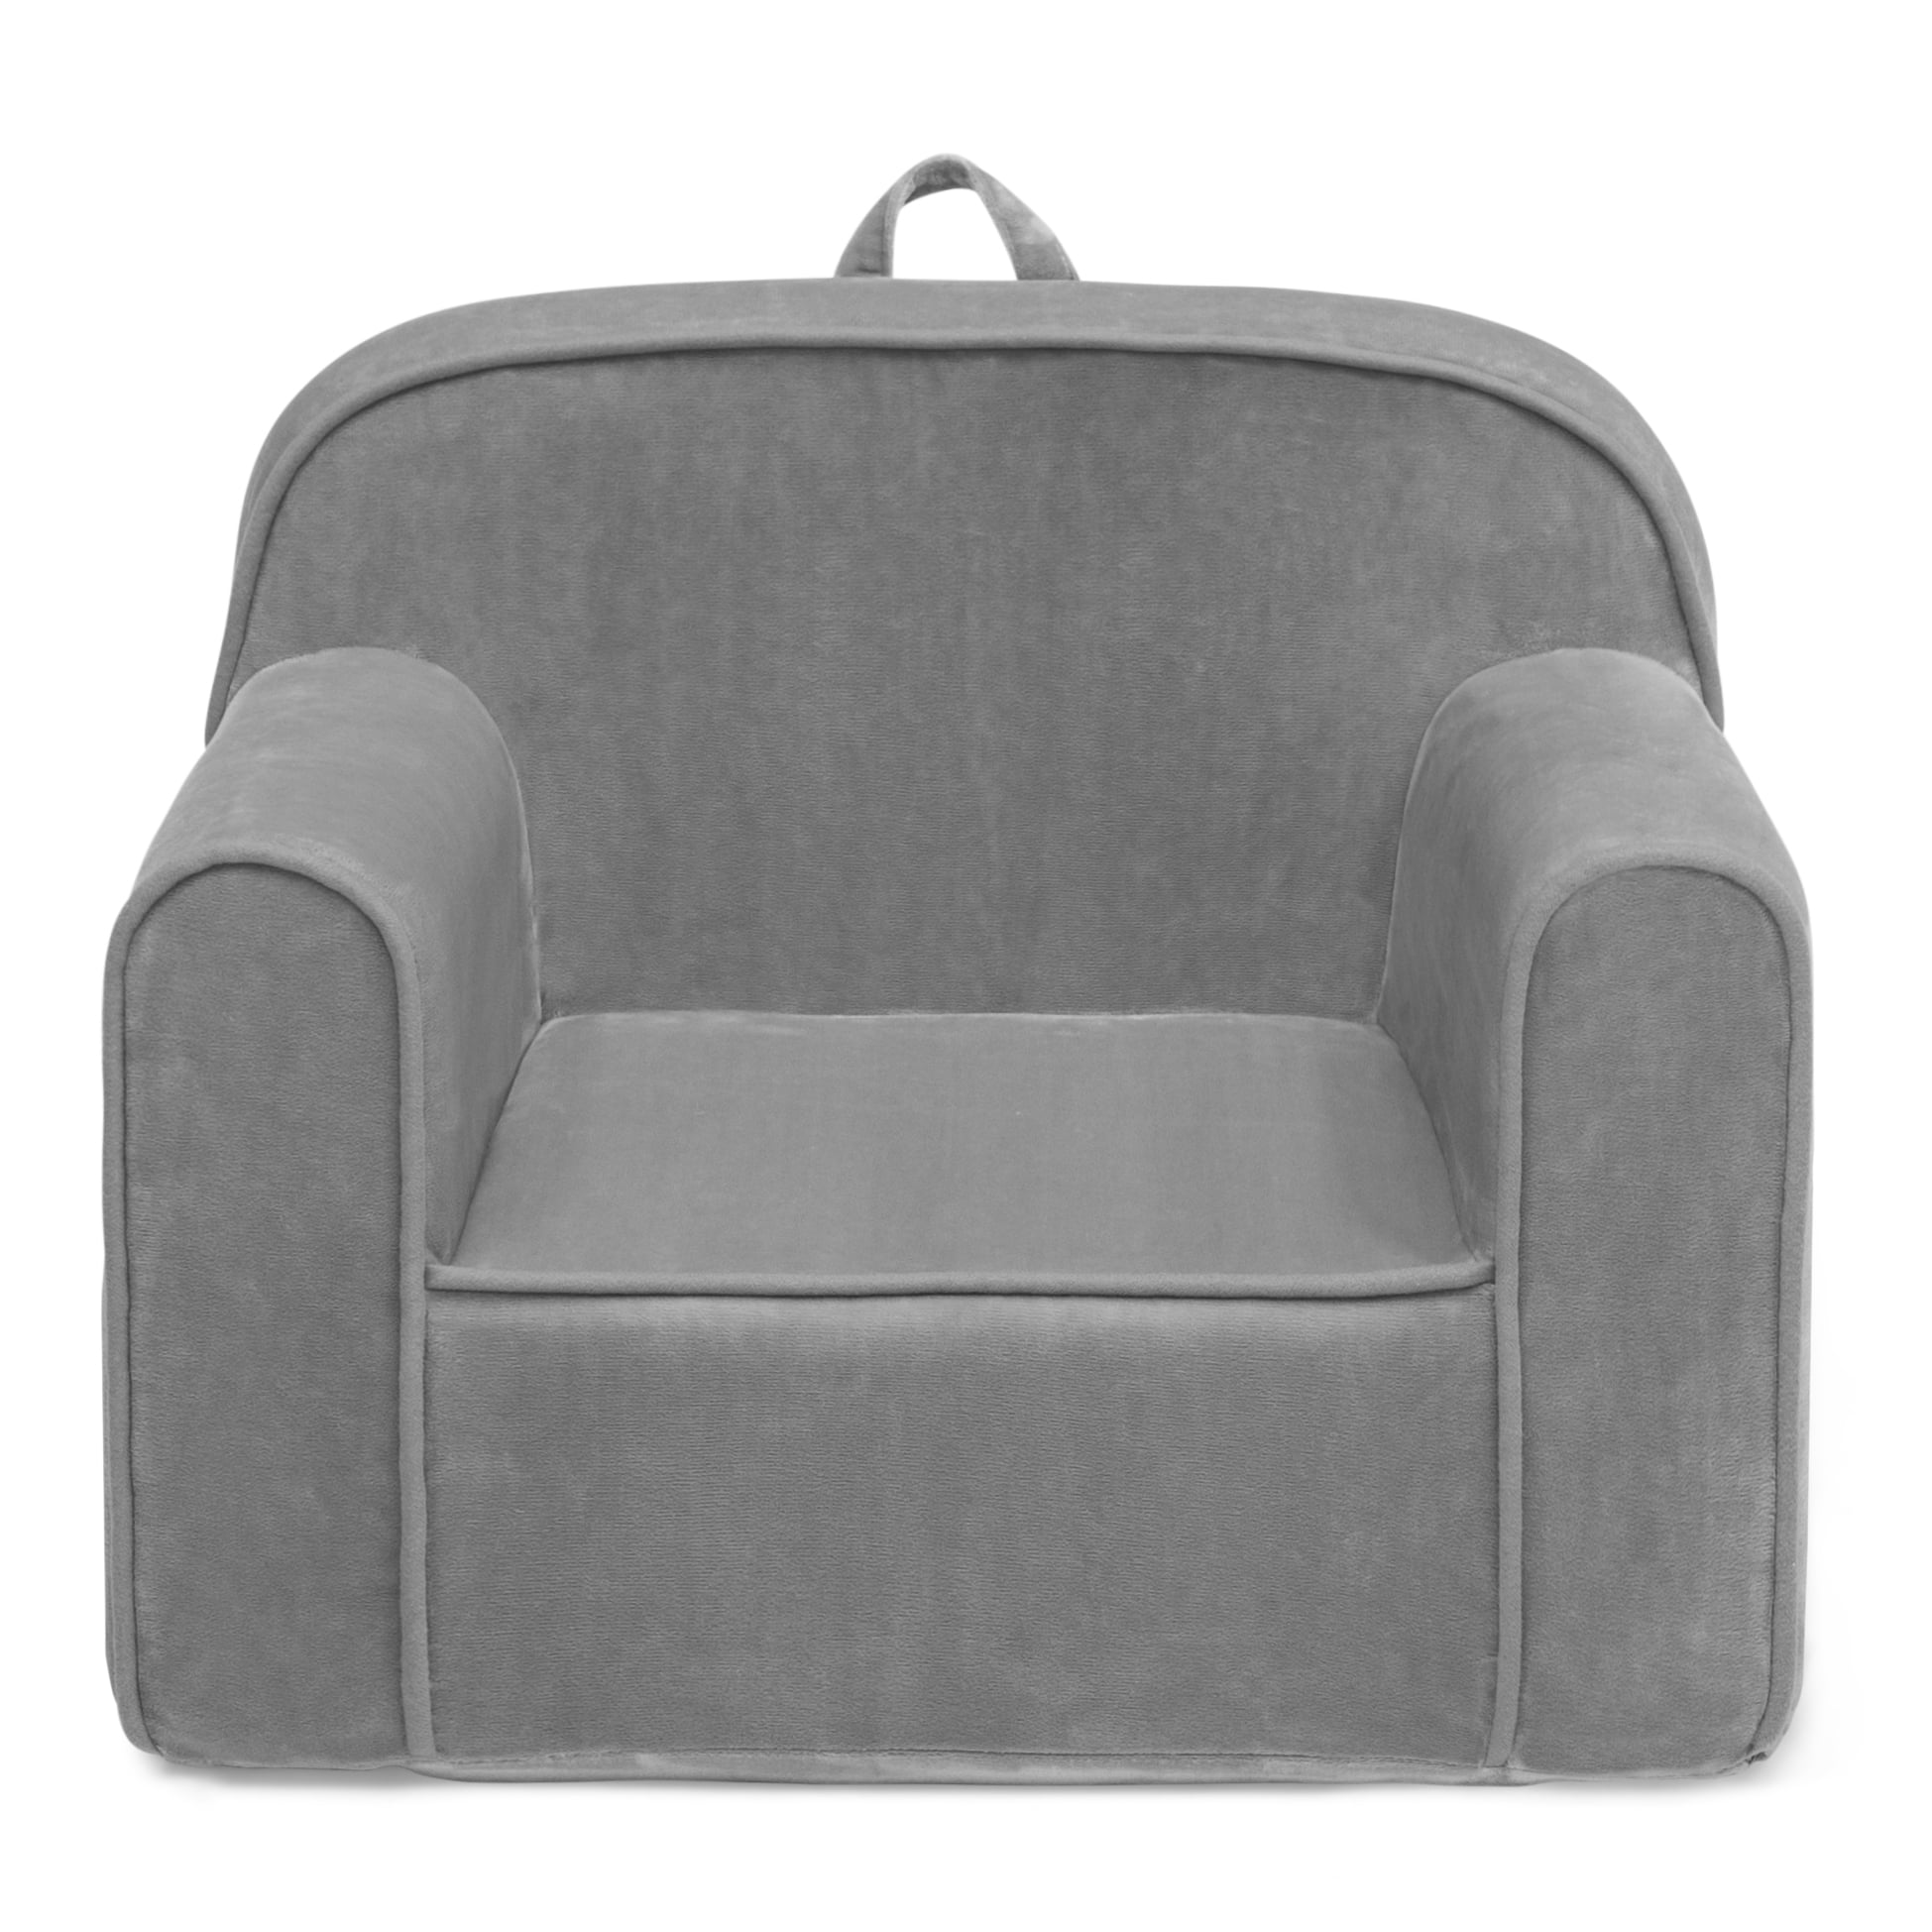 CHOCOLATE SUEDE SHERPA COVER SMALL INSERT FOR KIDS ANYWHERE CHAIR 